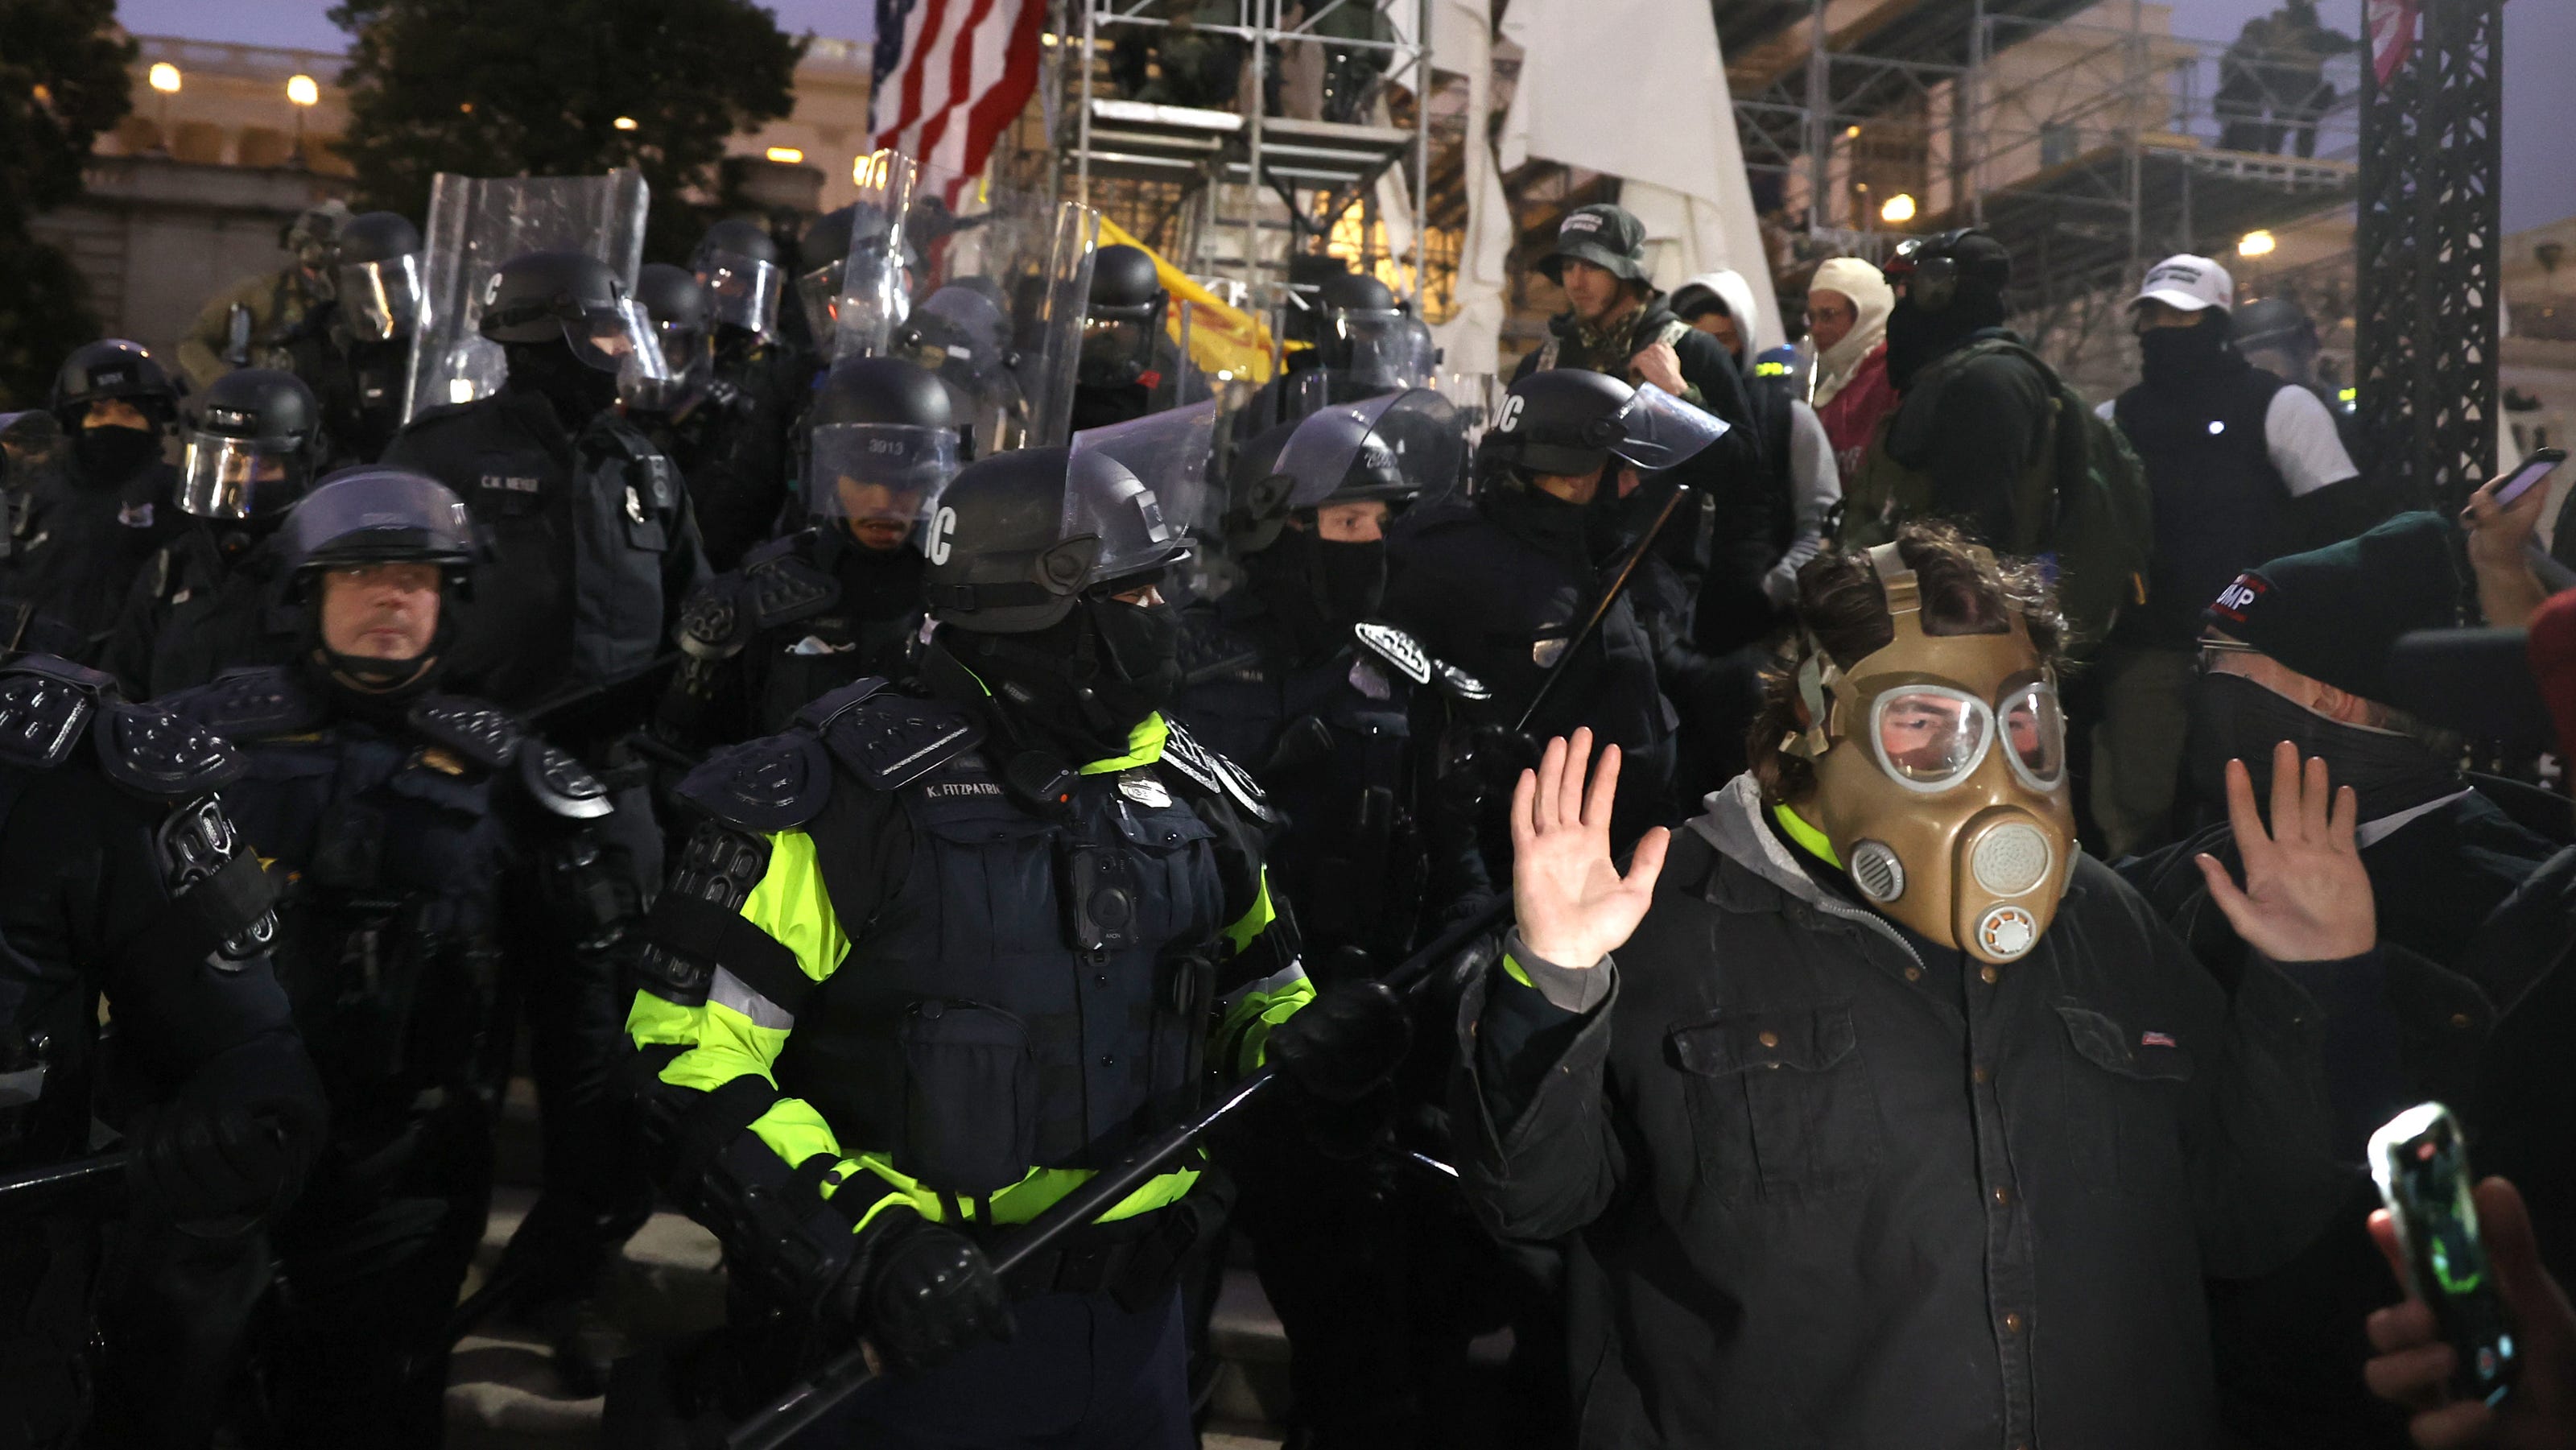 DC riots, COVID19, NFL playoffs 5 things to know this weekend